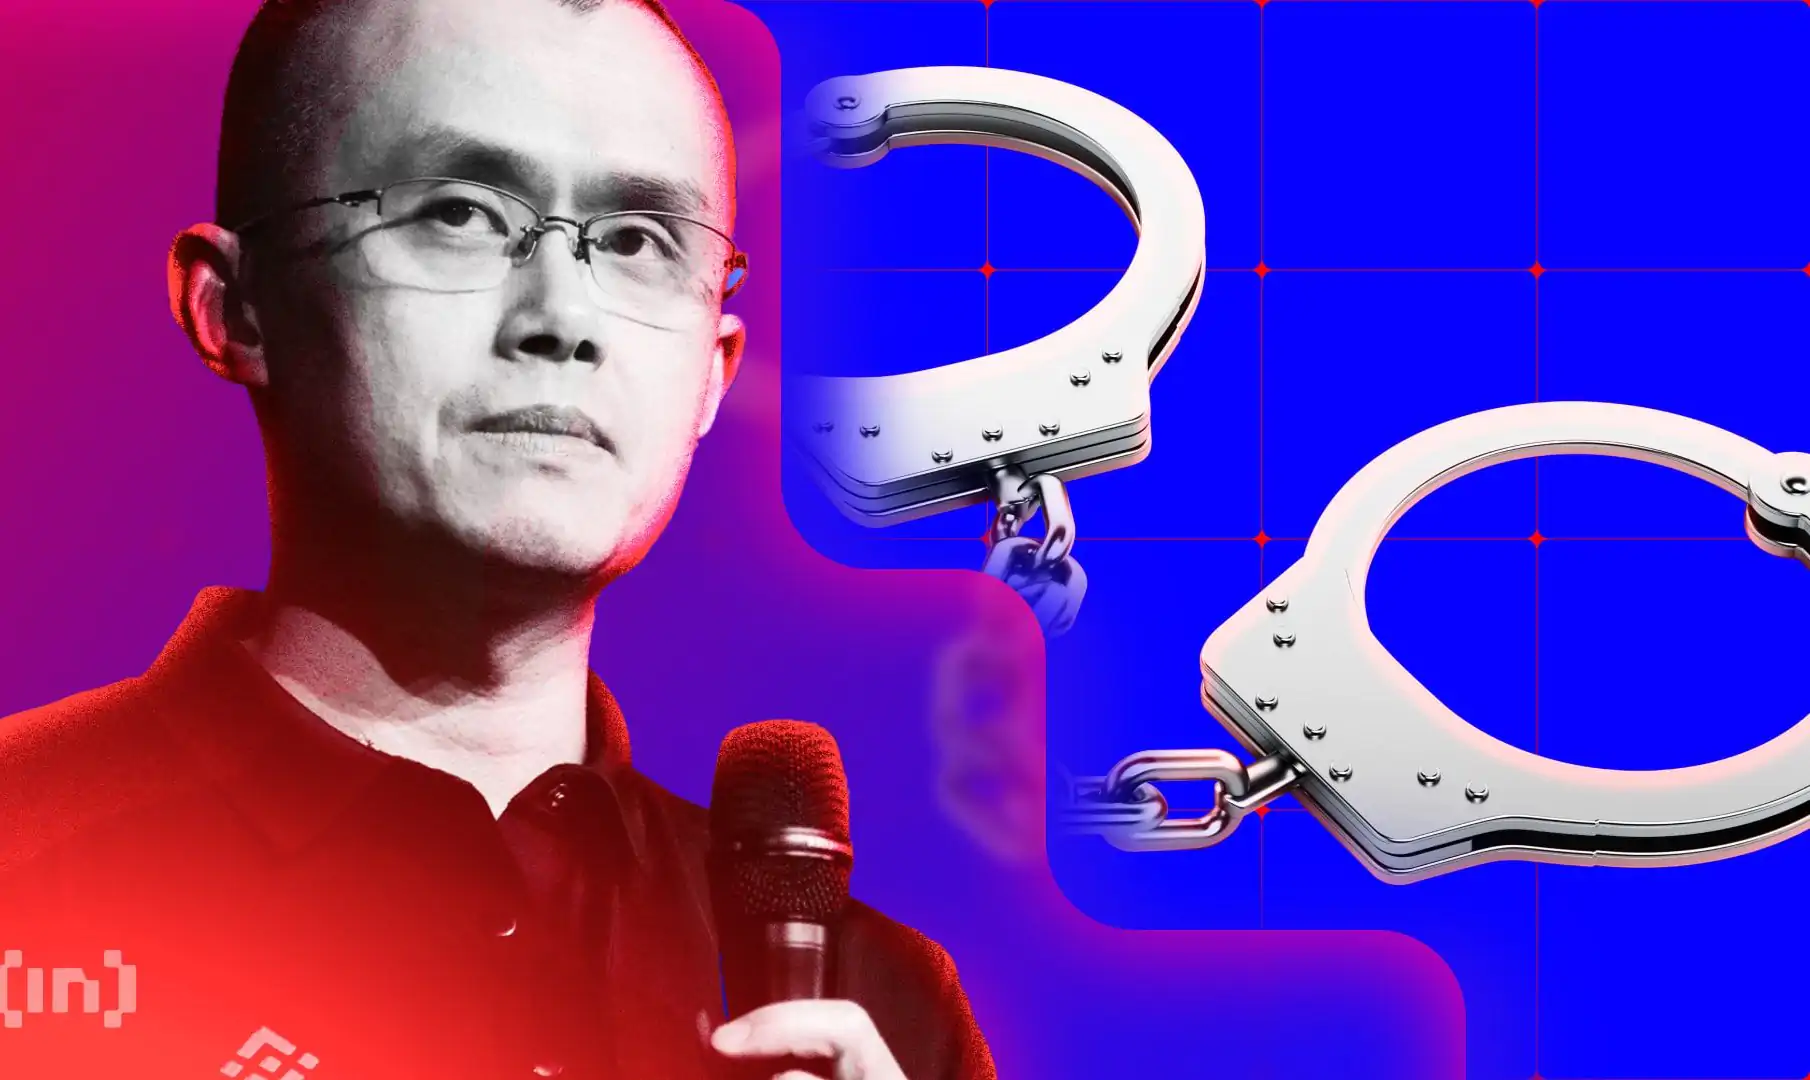 Former Binance CEO Changpeng Zhao Could Spend 3 Years in Prison